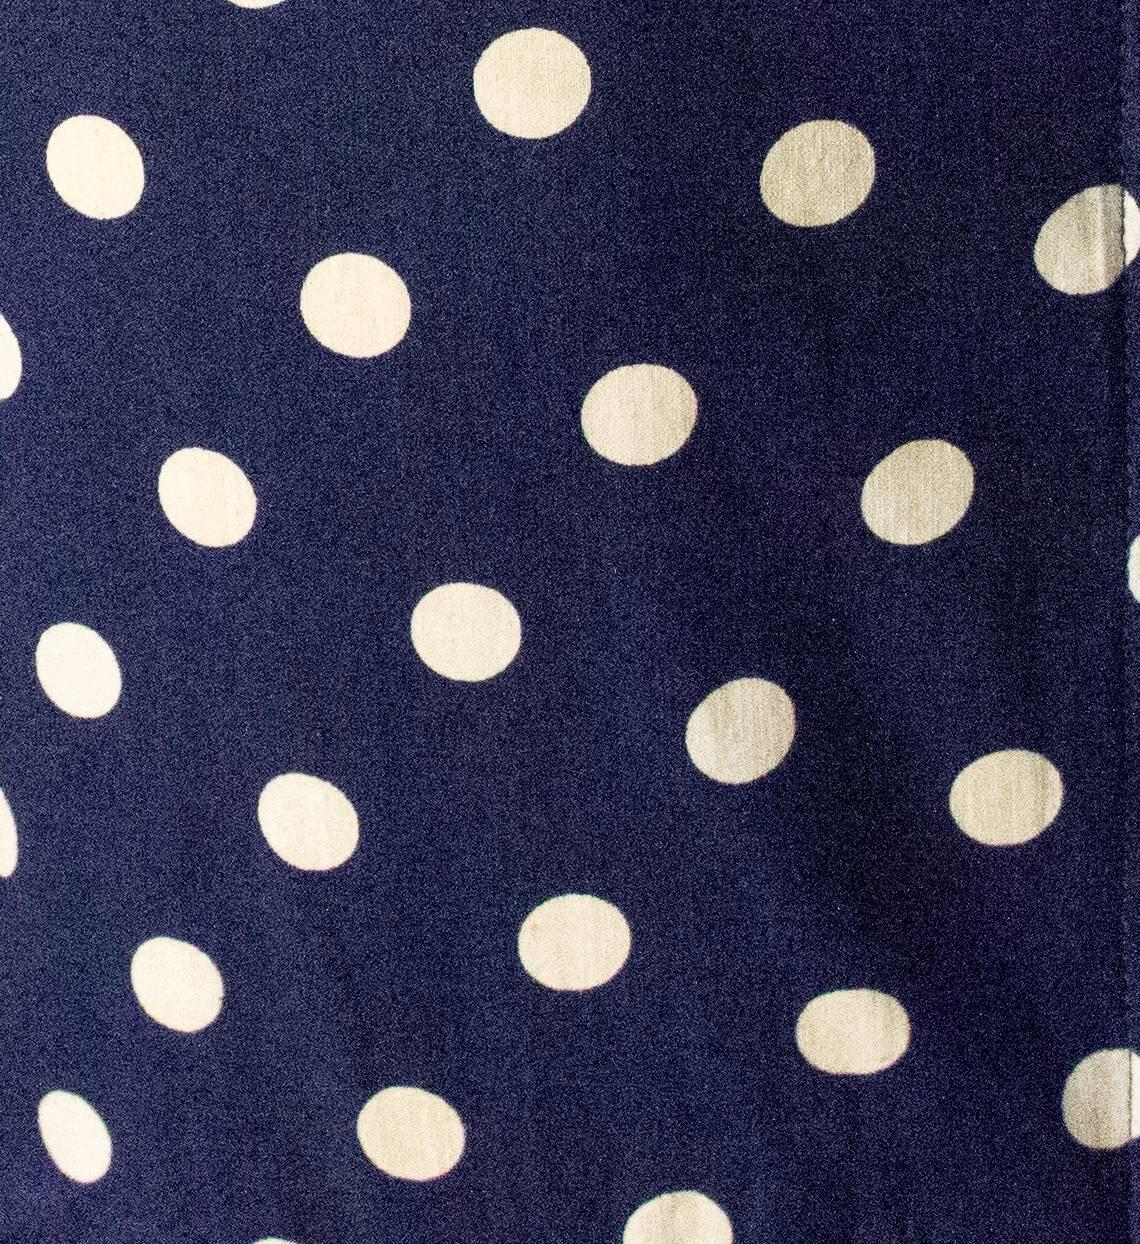 50s Navy Blue & Ivory Polka Dot Dress with Full Gathered Skirt. Metal zipper up the back. Rushed bodice.